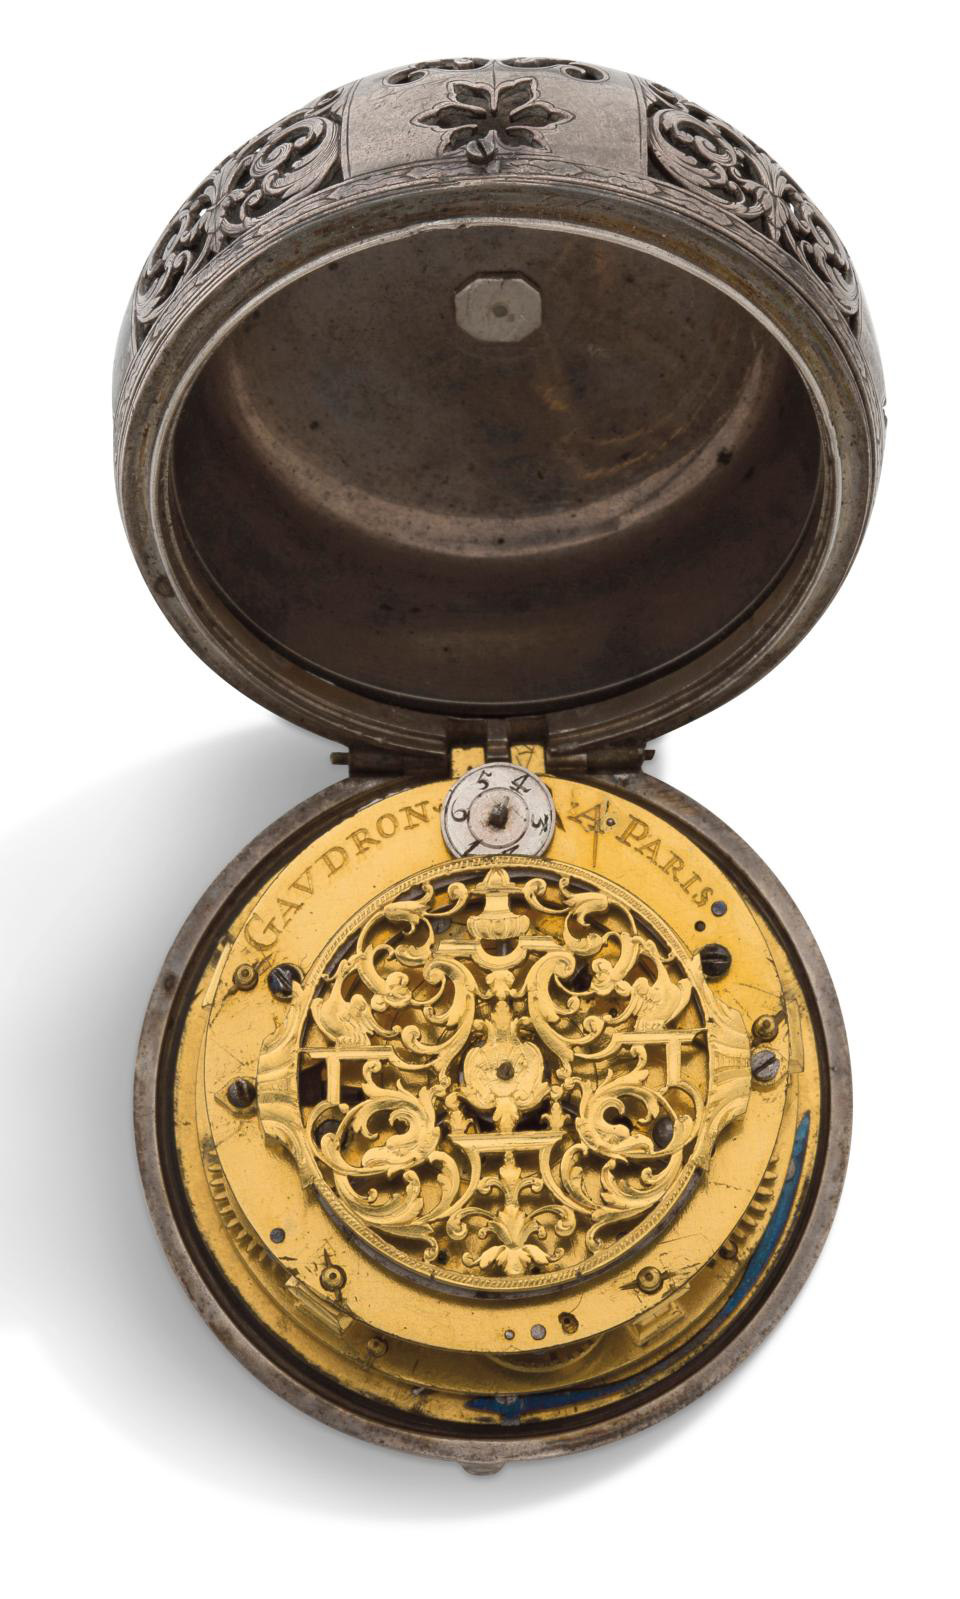 Gaudron, Paris, late 17th century, silver “onion” watch with chimes and an alarm, foliage decoration, mechanical movement with key winding